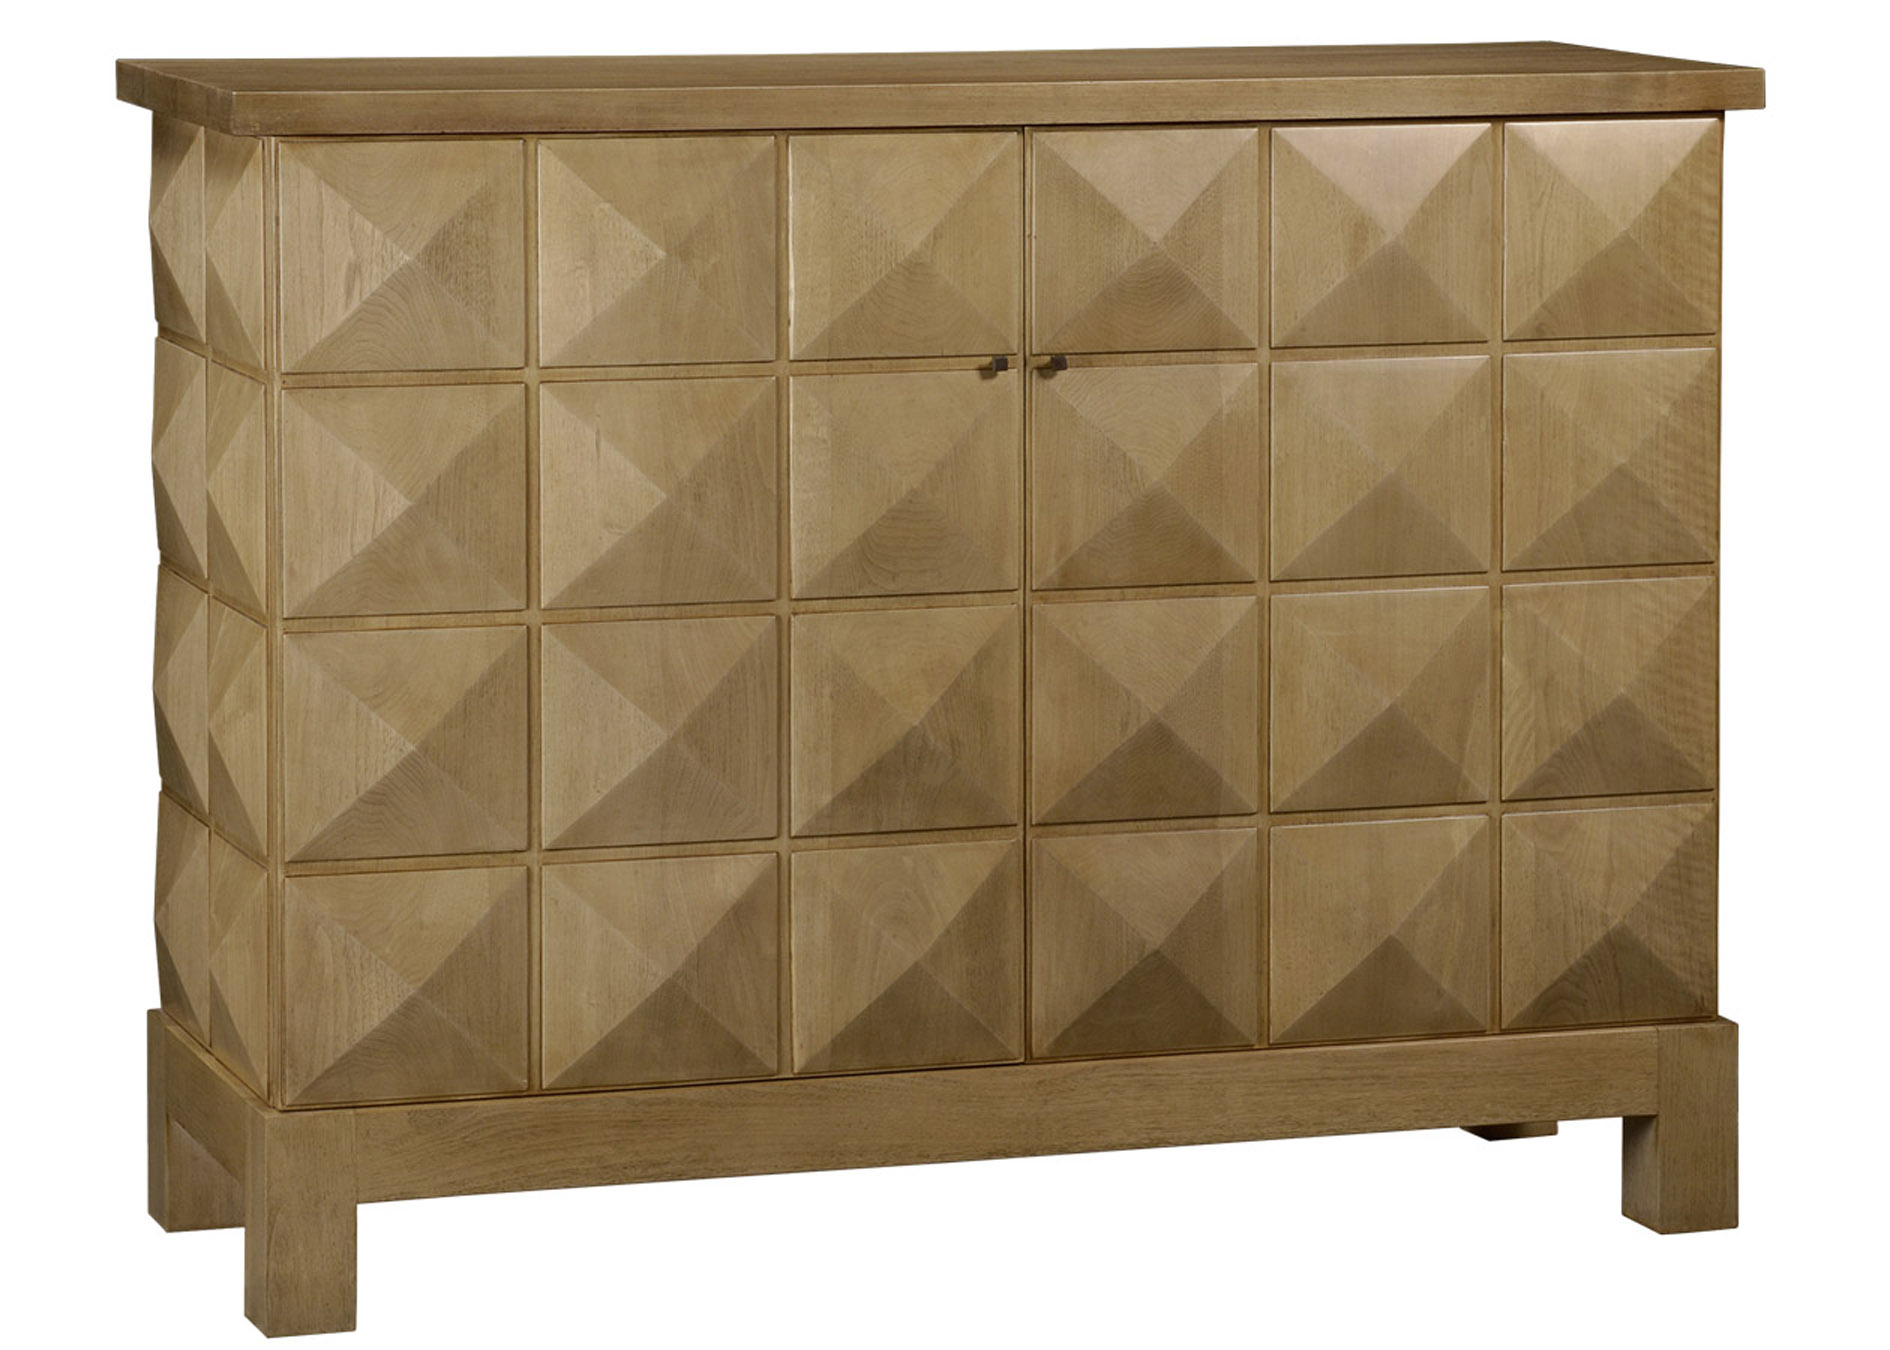 Kasai modern contemporary server cabinet with diamond door pattern by Woodland furniture in Idaho Falls